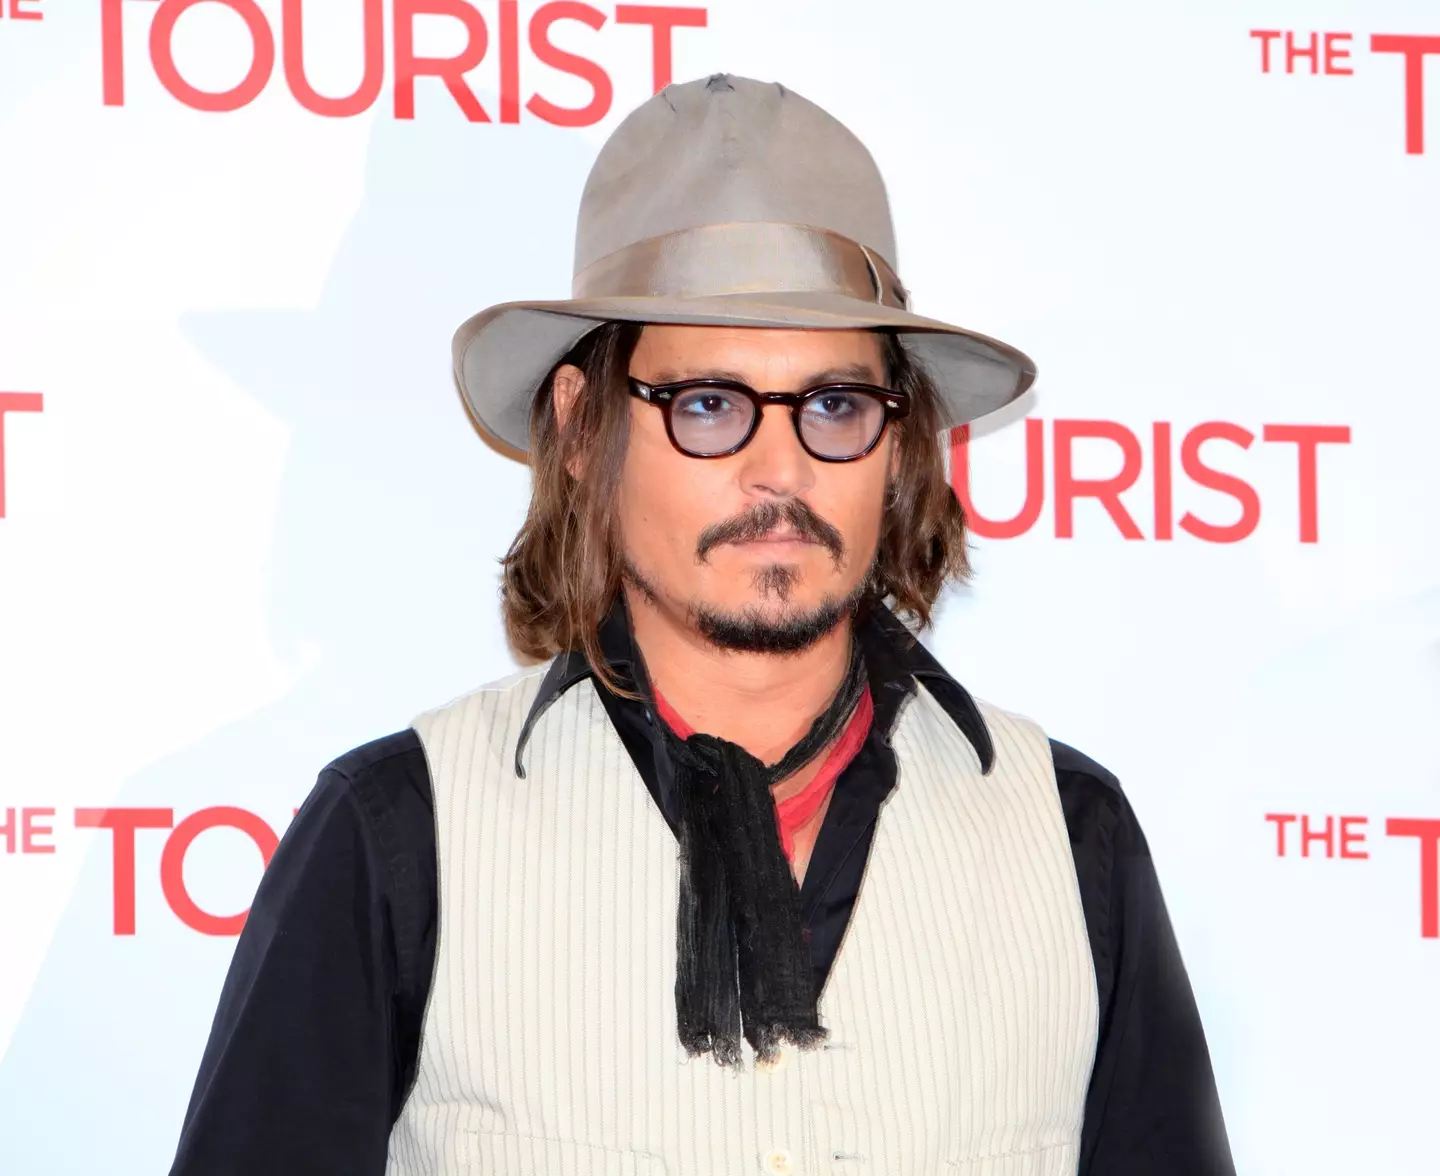 Johnny Depp won the defamation trial he was embroiled in with ex-partner Amber Heard.